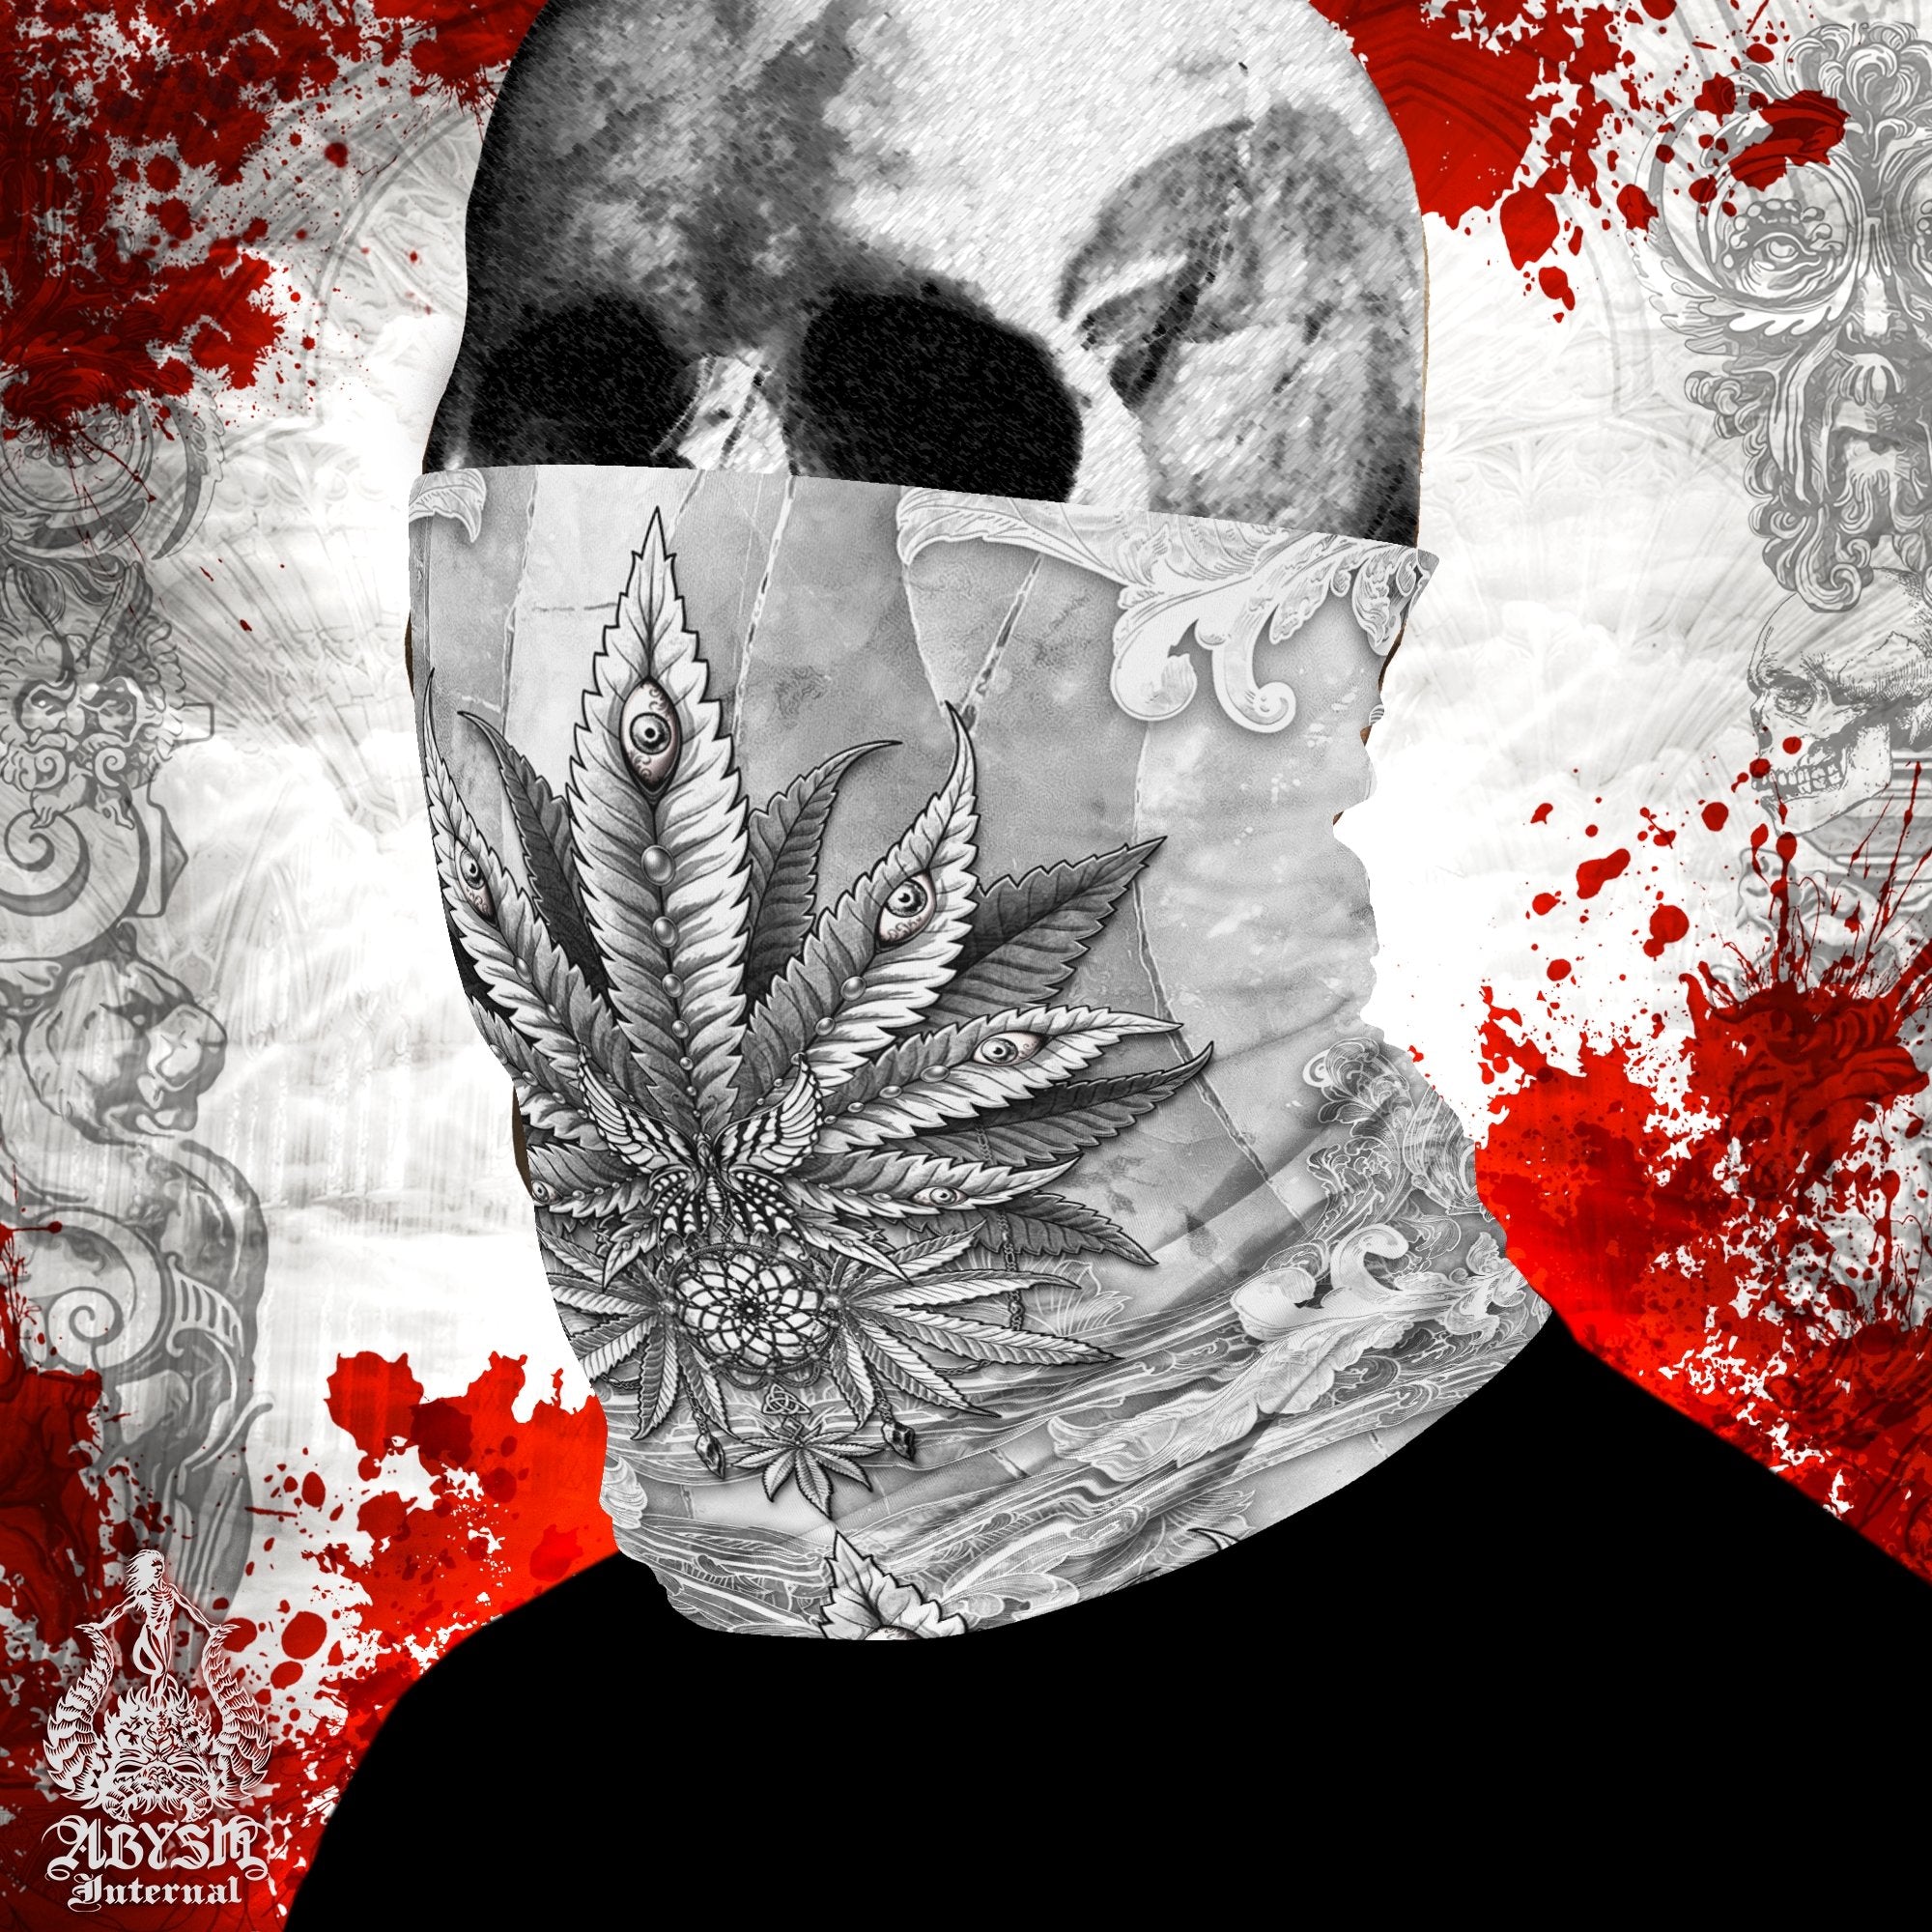 Weed Neck Gaiter, Cannabis Face Mask, White Goth Marijuana Head Covering, Outdoors Festival Outfit, Heavy Metal Concert, 420 Gift - Stone - Abysm Internal